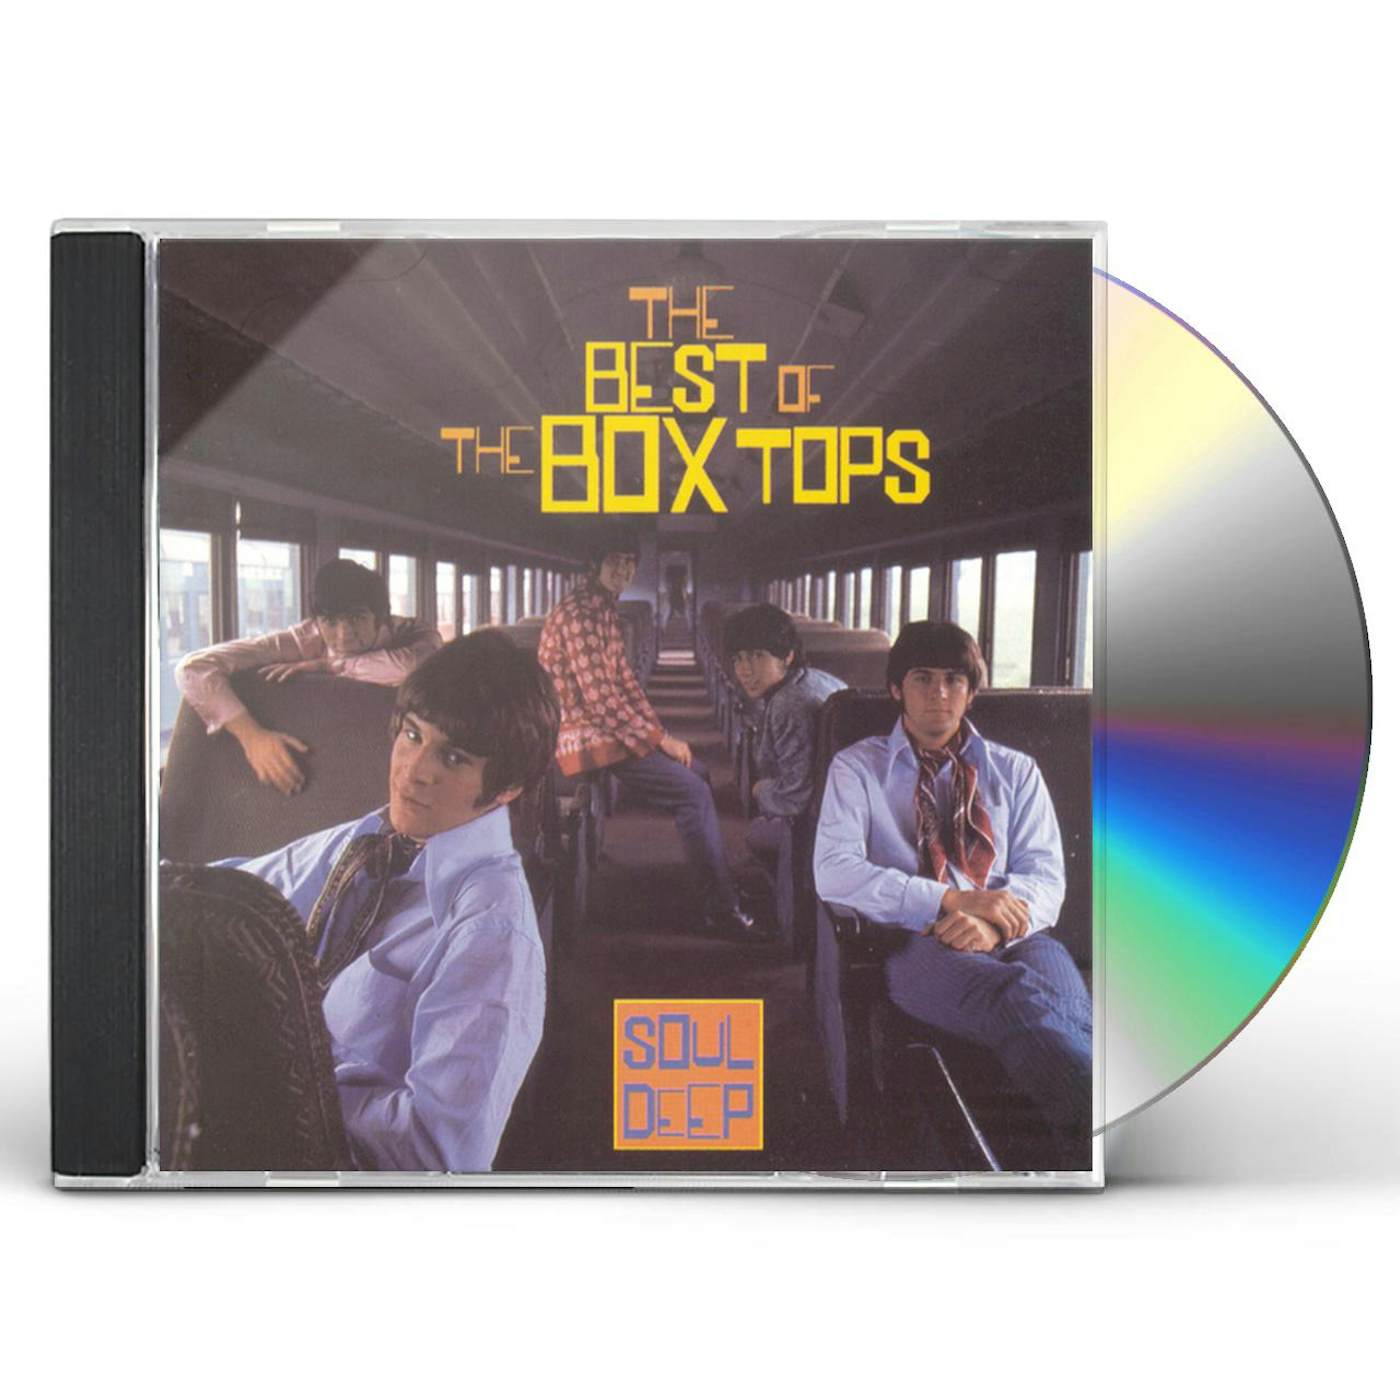 The Box Tops BEST OF CD